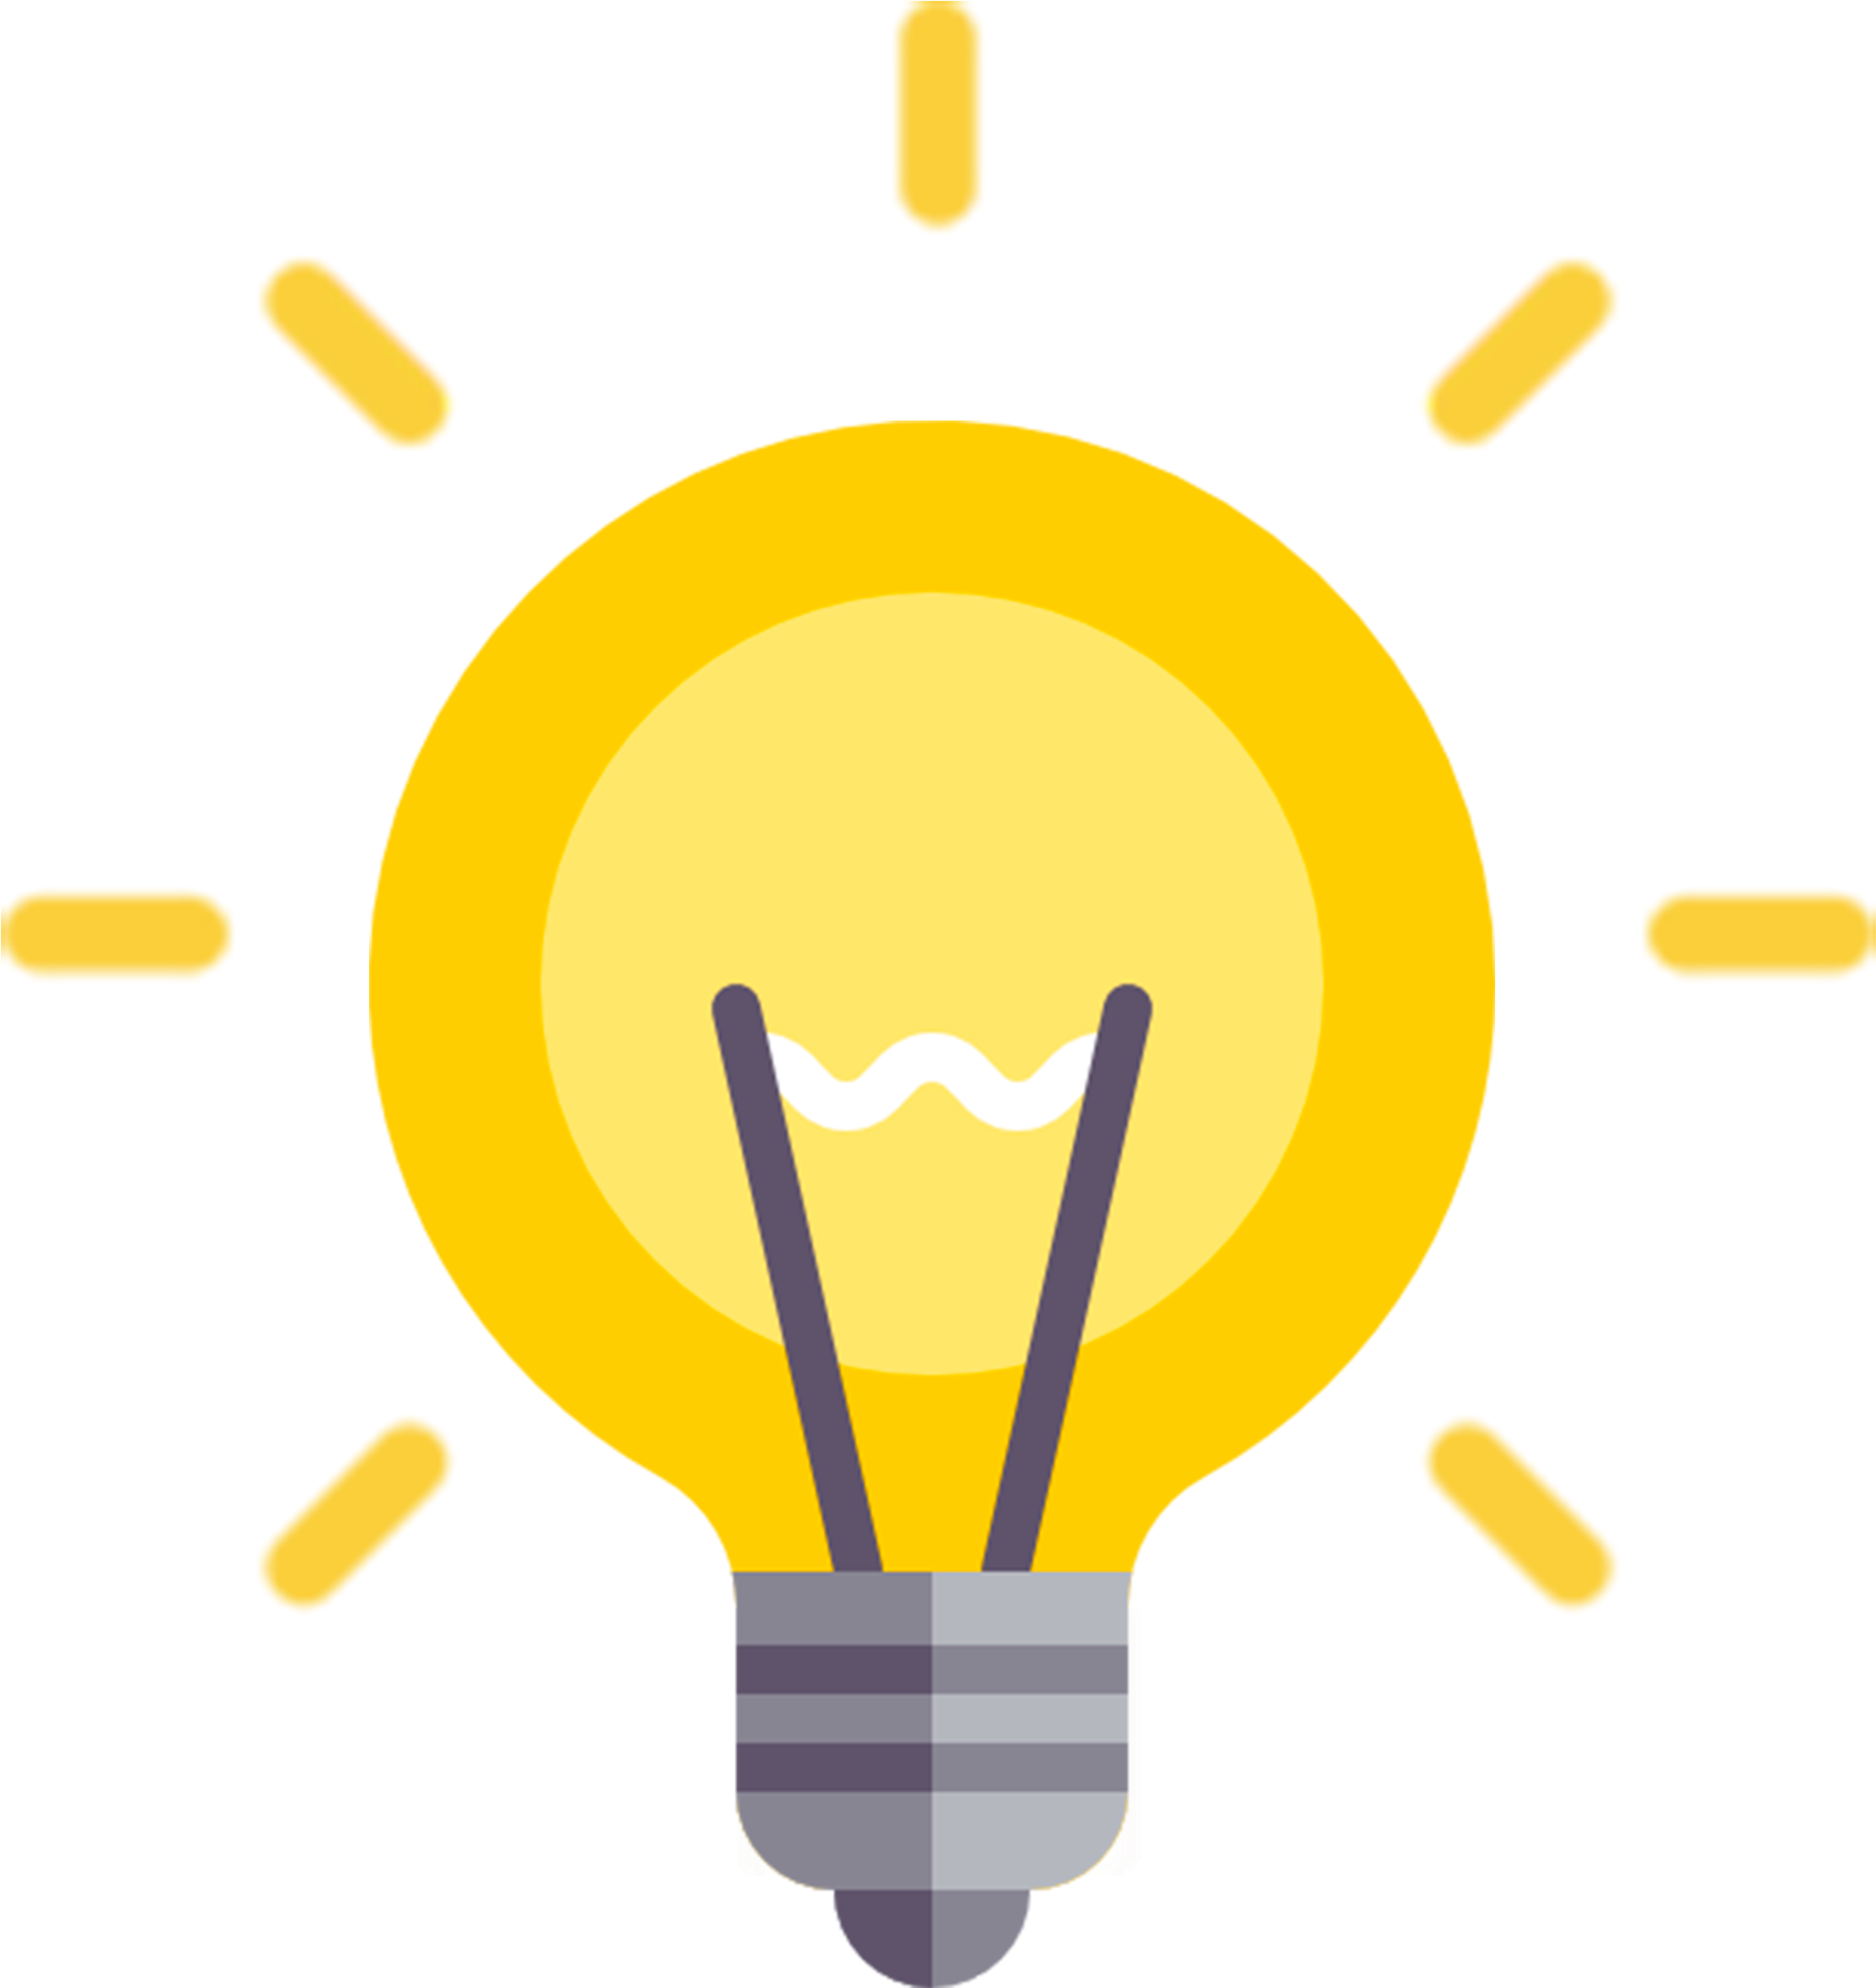 Icons Light Idea Computer Lighting Incandescent Bulb - Innovation Icon Png (2362x2362)